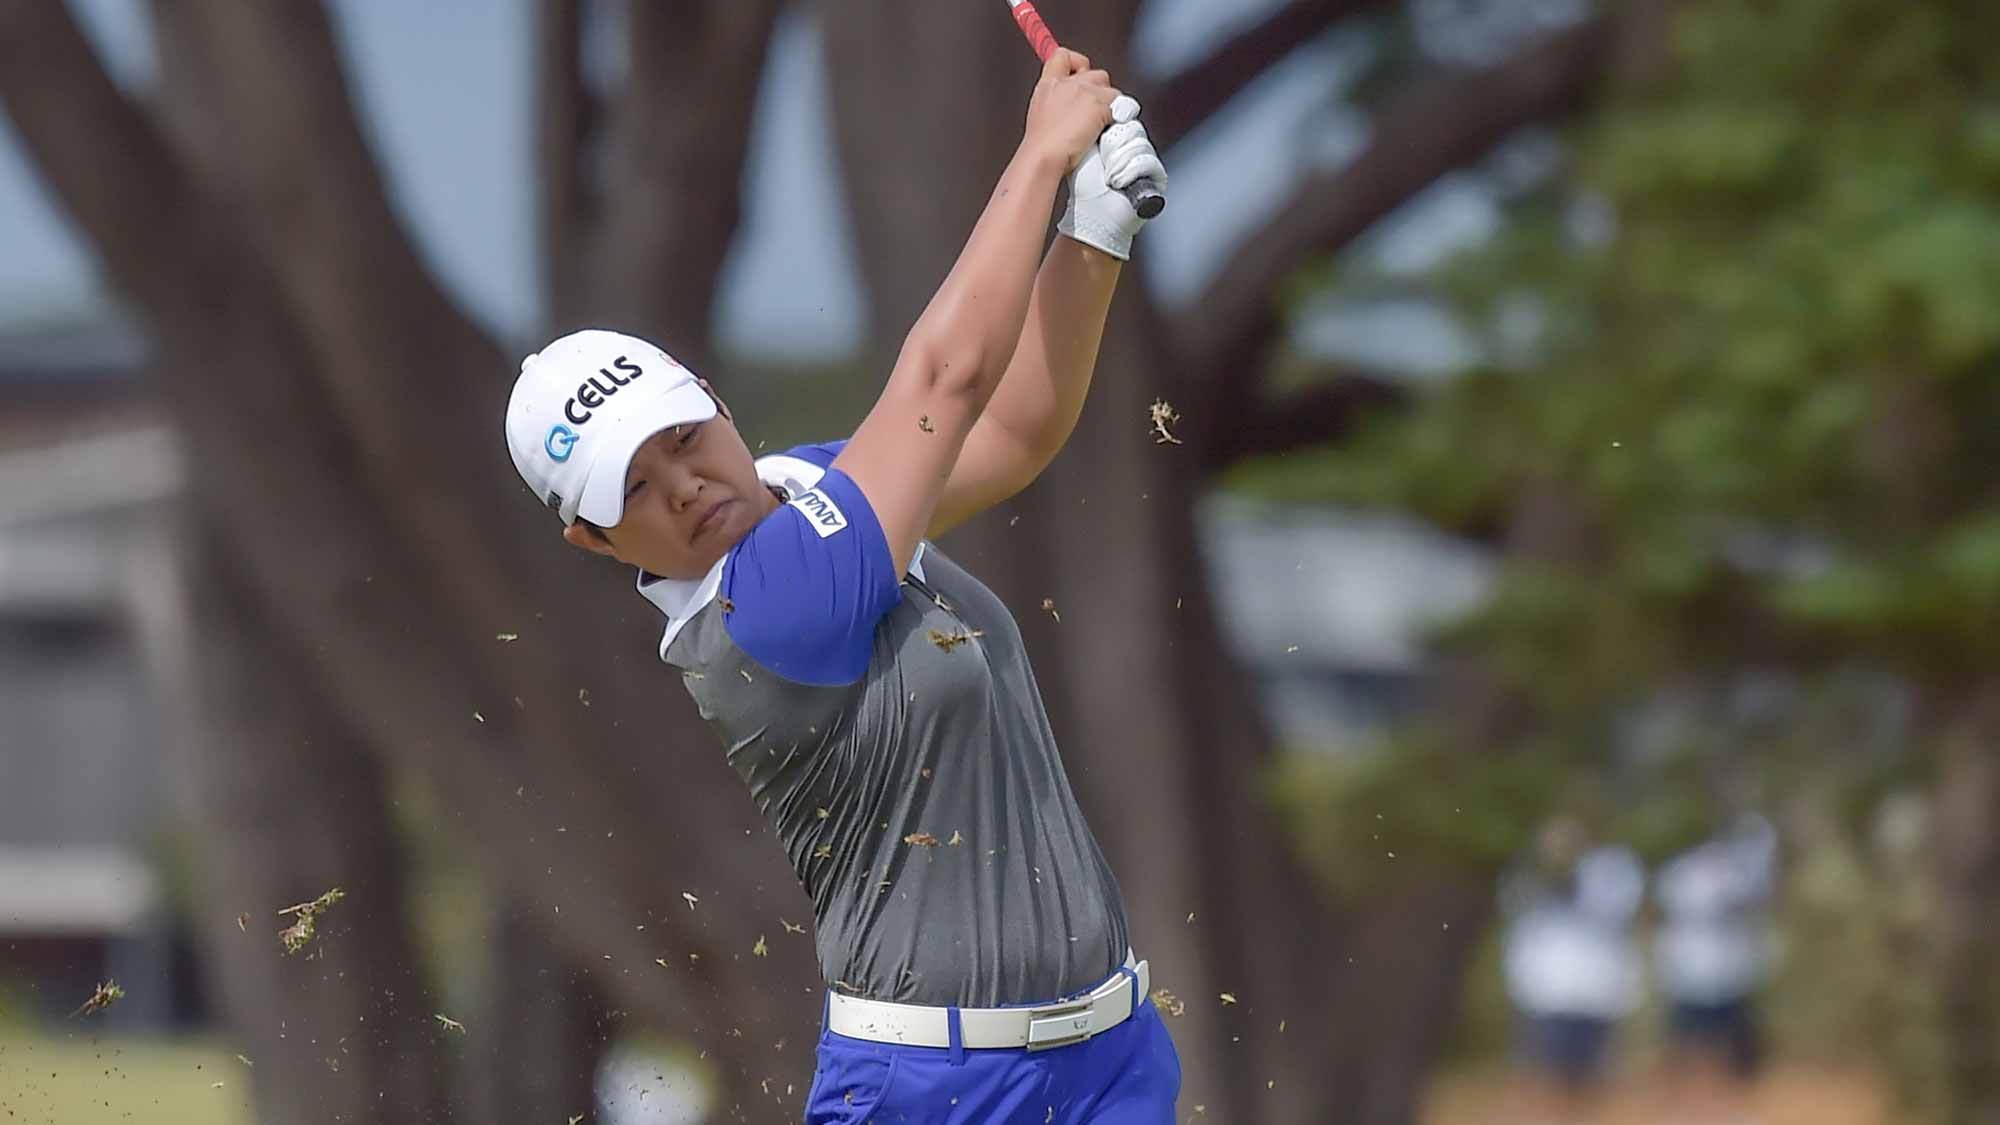 Haru Nomura hits a shot during the second round of the ISPS Handa Vic Open in Geelong, Australia on February 8, 2019